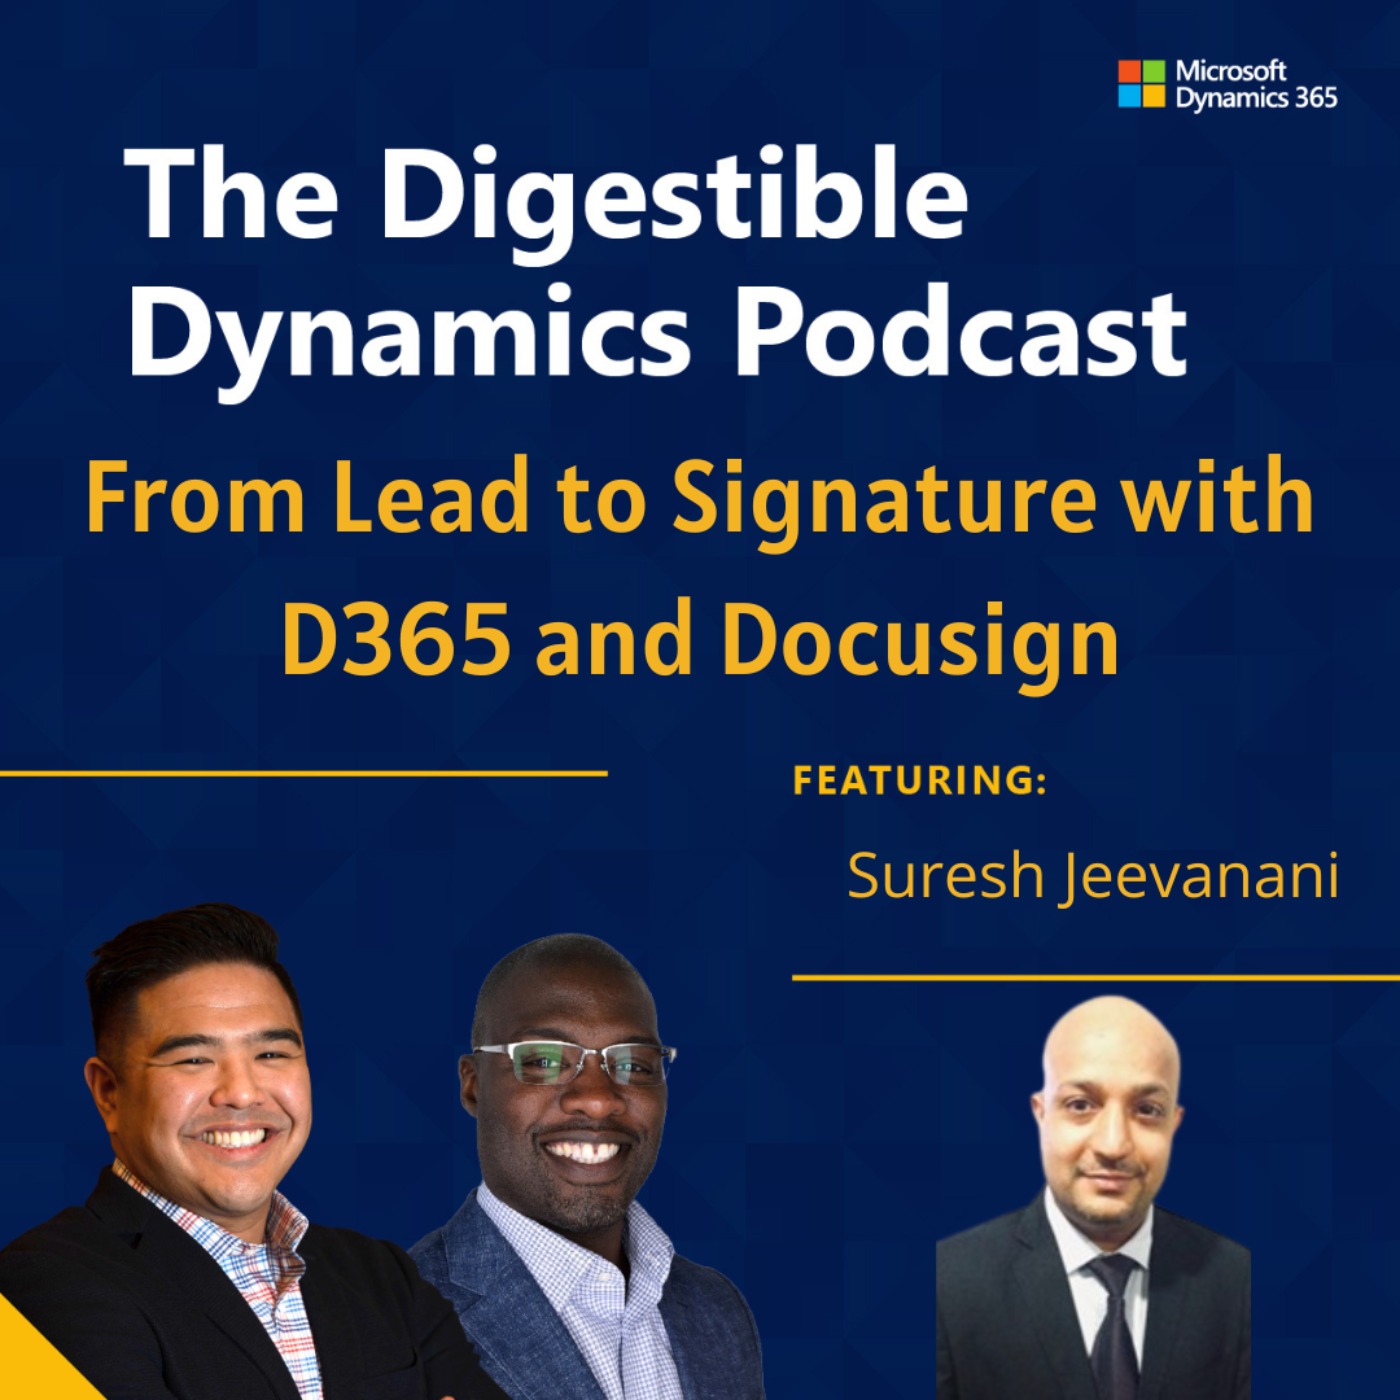 From Lead to Signature with D365 and Docusign